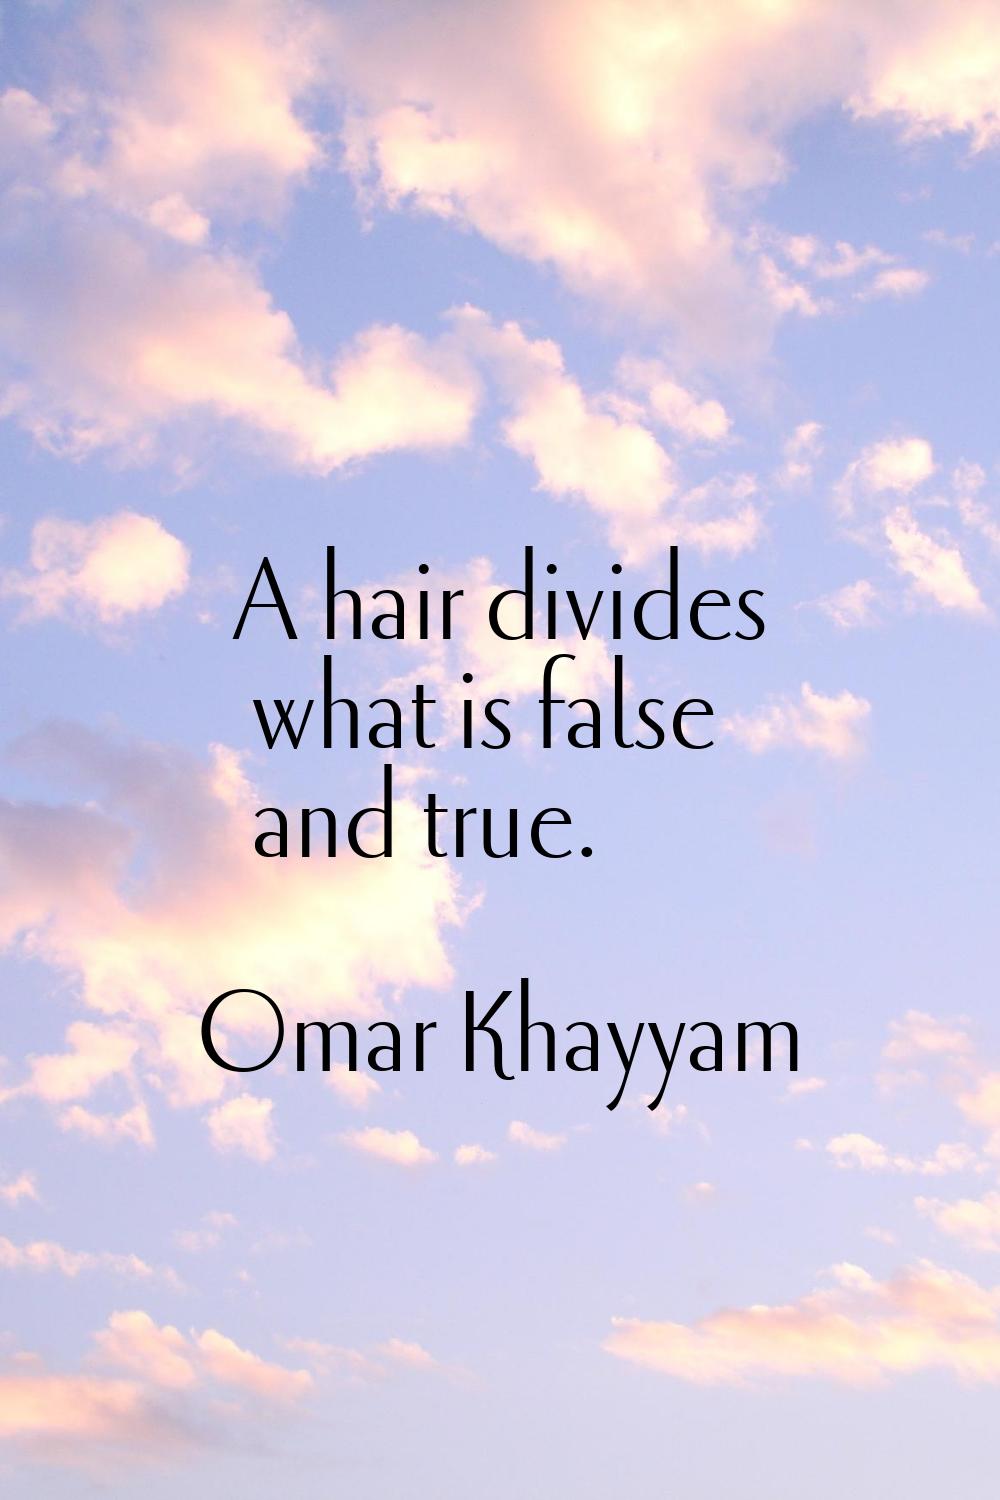 A hair divides what is false and true.